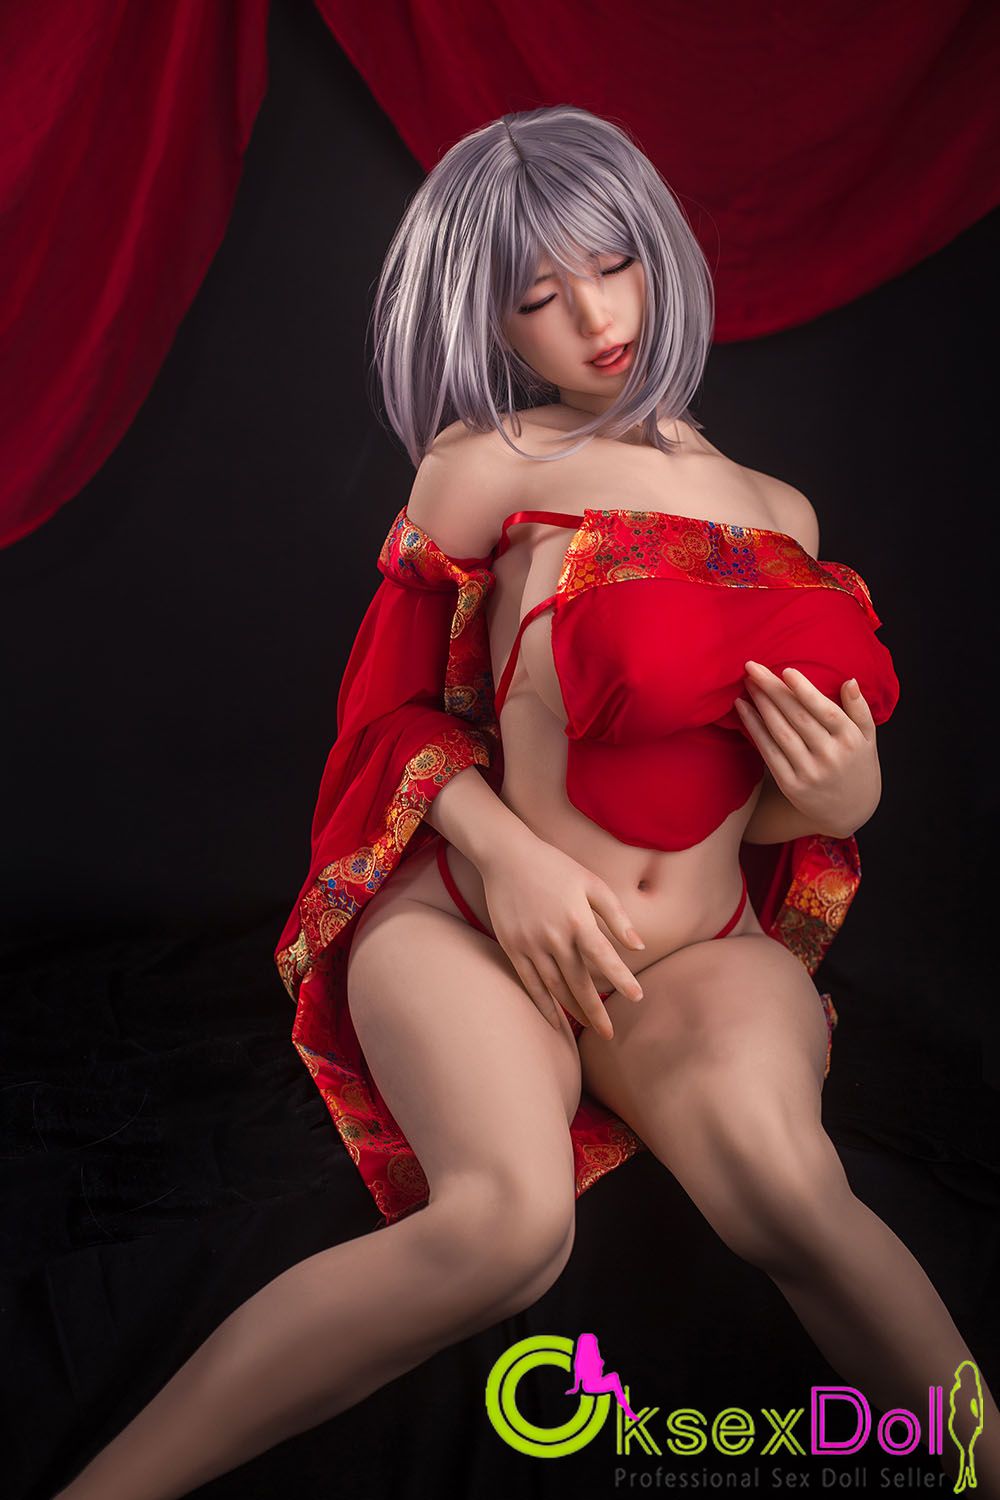 Closed Eyes Sex Doll Real Doll pic